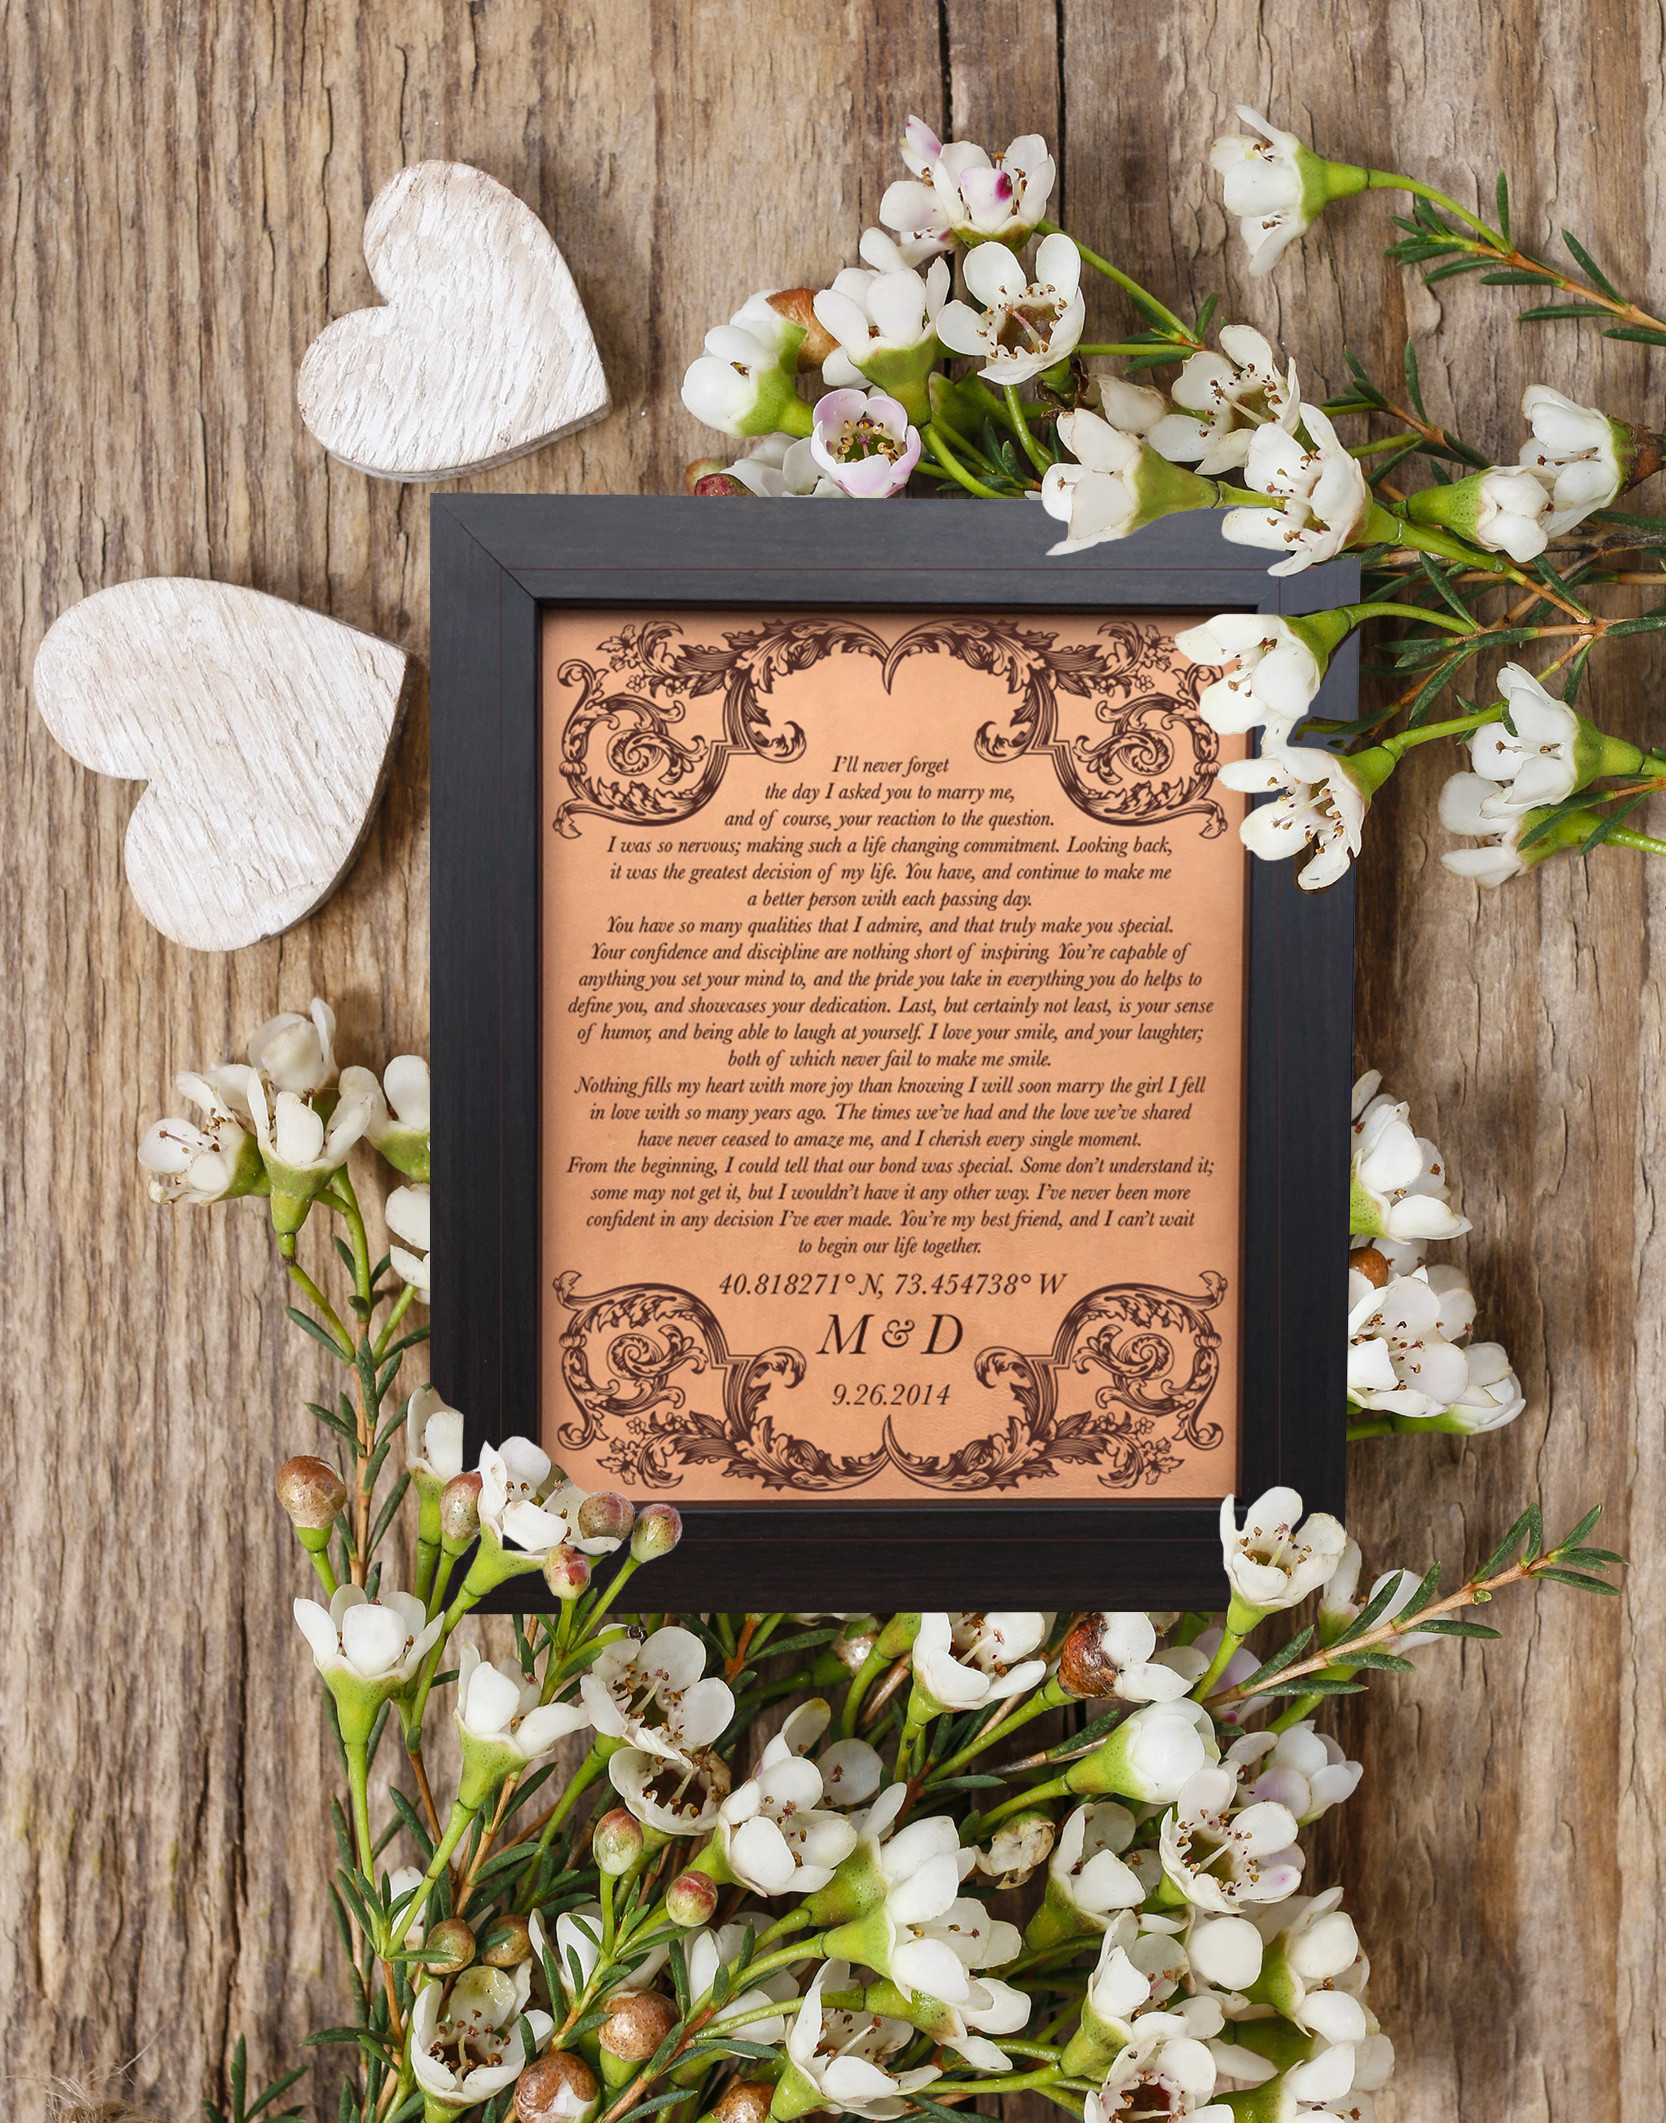 Vows Wedding Store
 Shop Personalized Gifts Anniversary Gifts Weddings & more